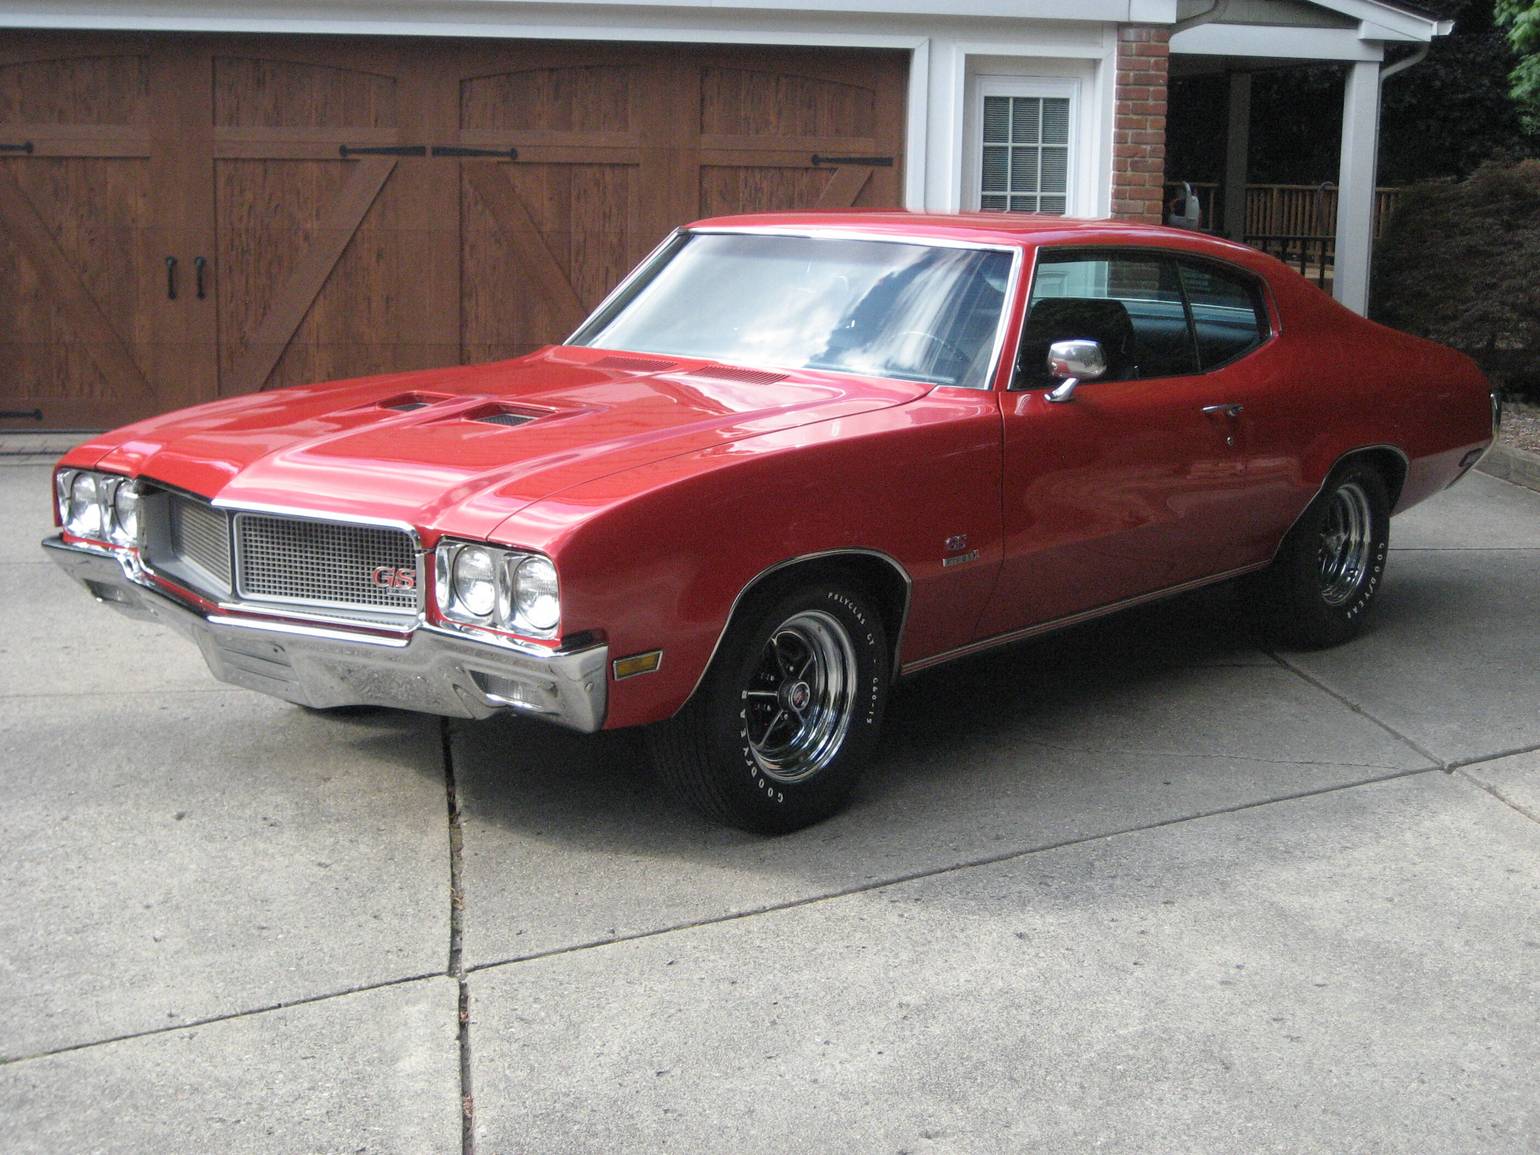 muscle-with-class-restored-1970-buick-skylark-gs-455-stage-1-hardtop-4-speed78496986-770-0@2X